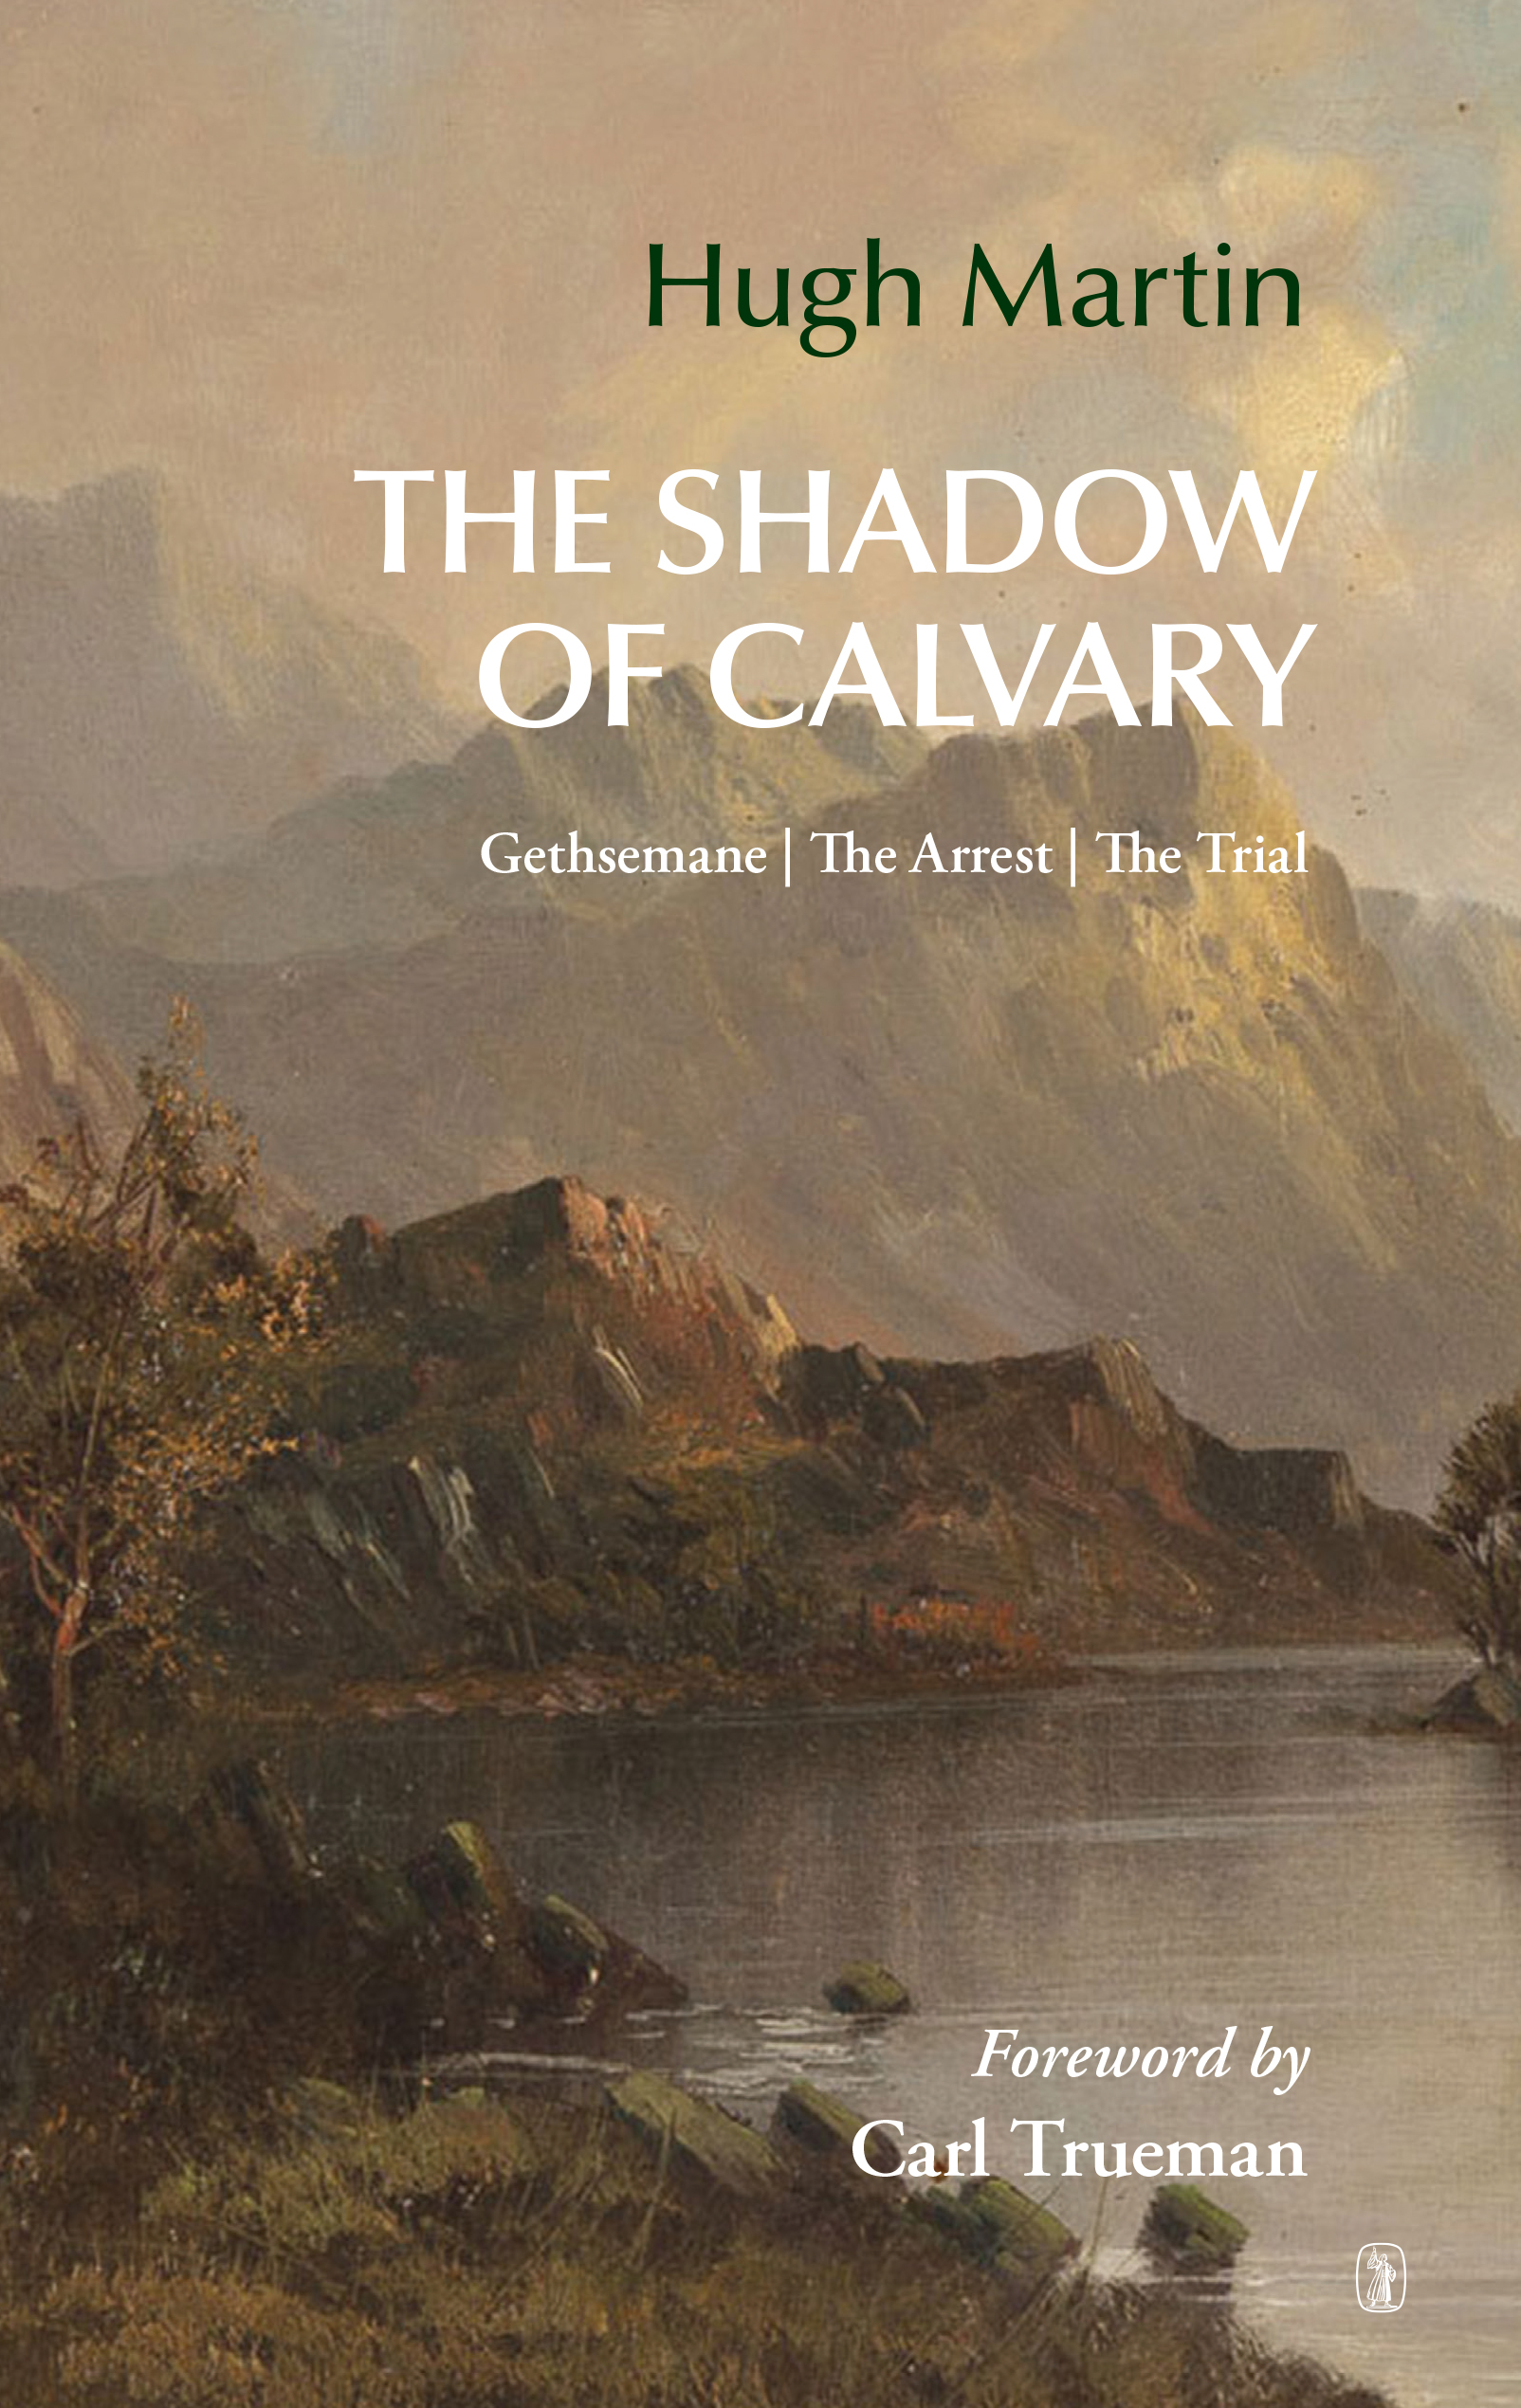 cover image for the shadow of calvary by hugh martin